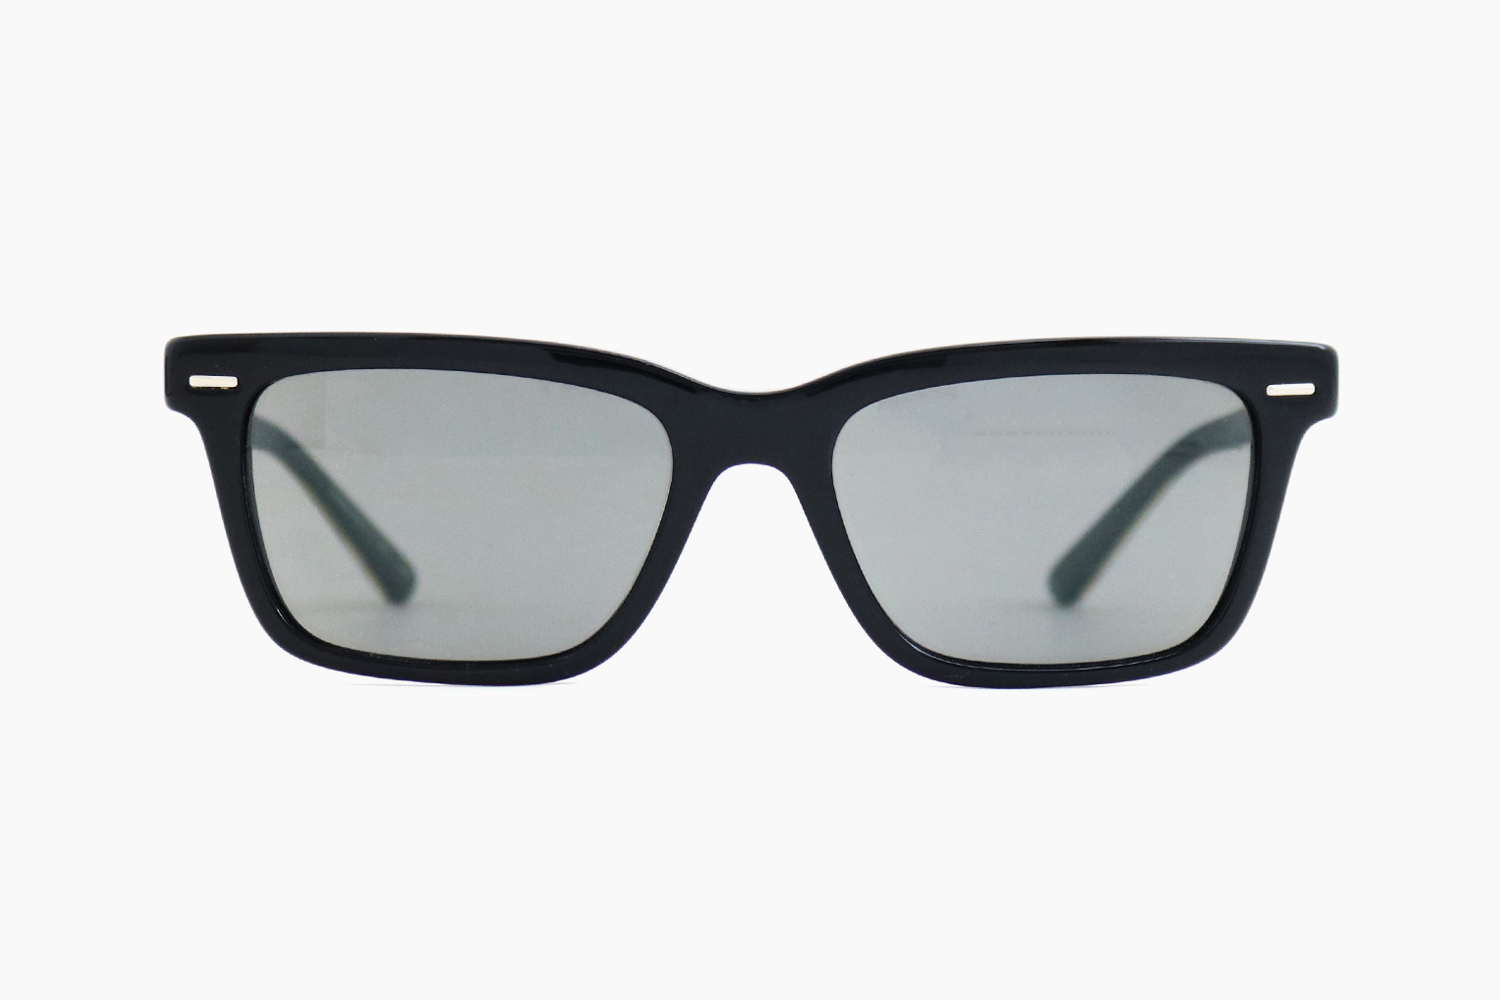 OLIVER PEOPLES THE ROW｜BA CC 53885SU - 1005R5｜OLIVER PEOPLES